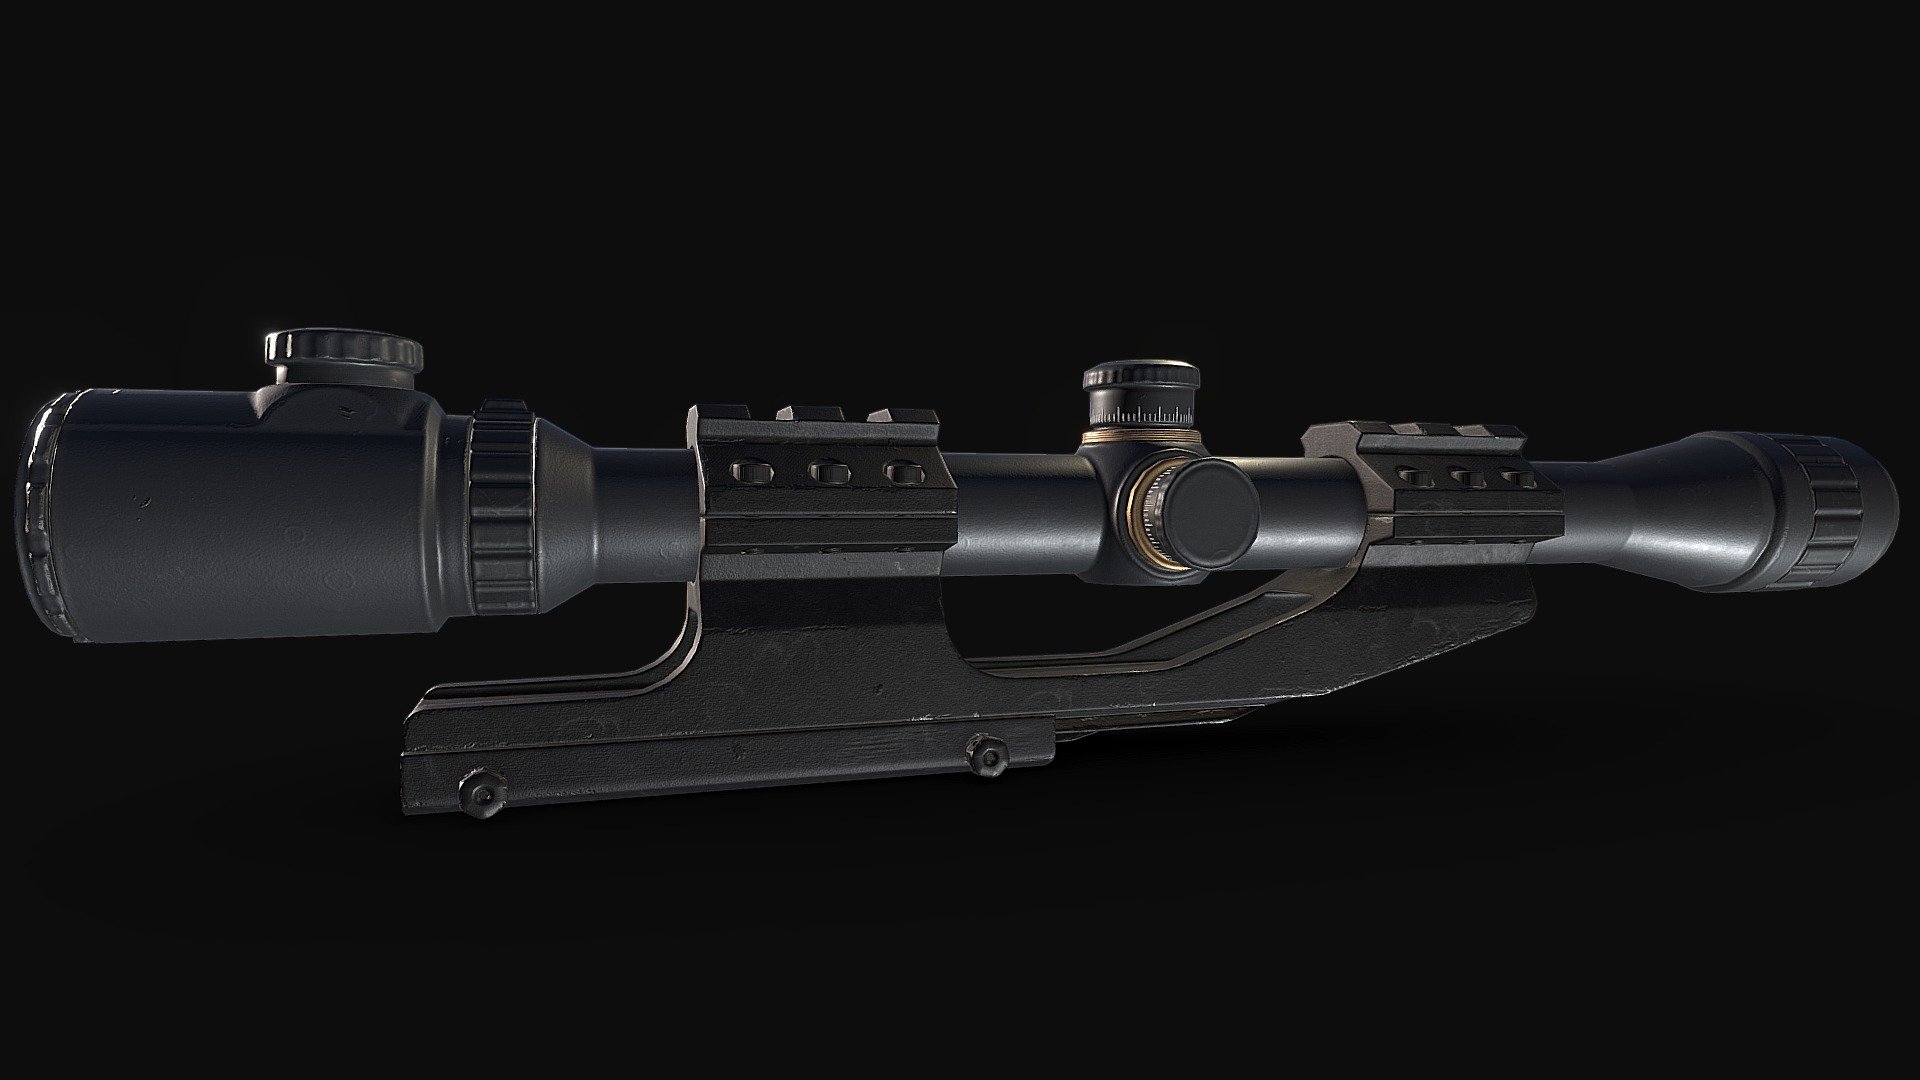 Hey, I am Bram

I modeled this scope because I wanted to practice with baking normals using substance painter. If you find any bugs or mistakes please notify me 3d model